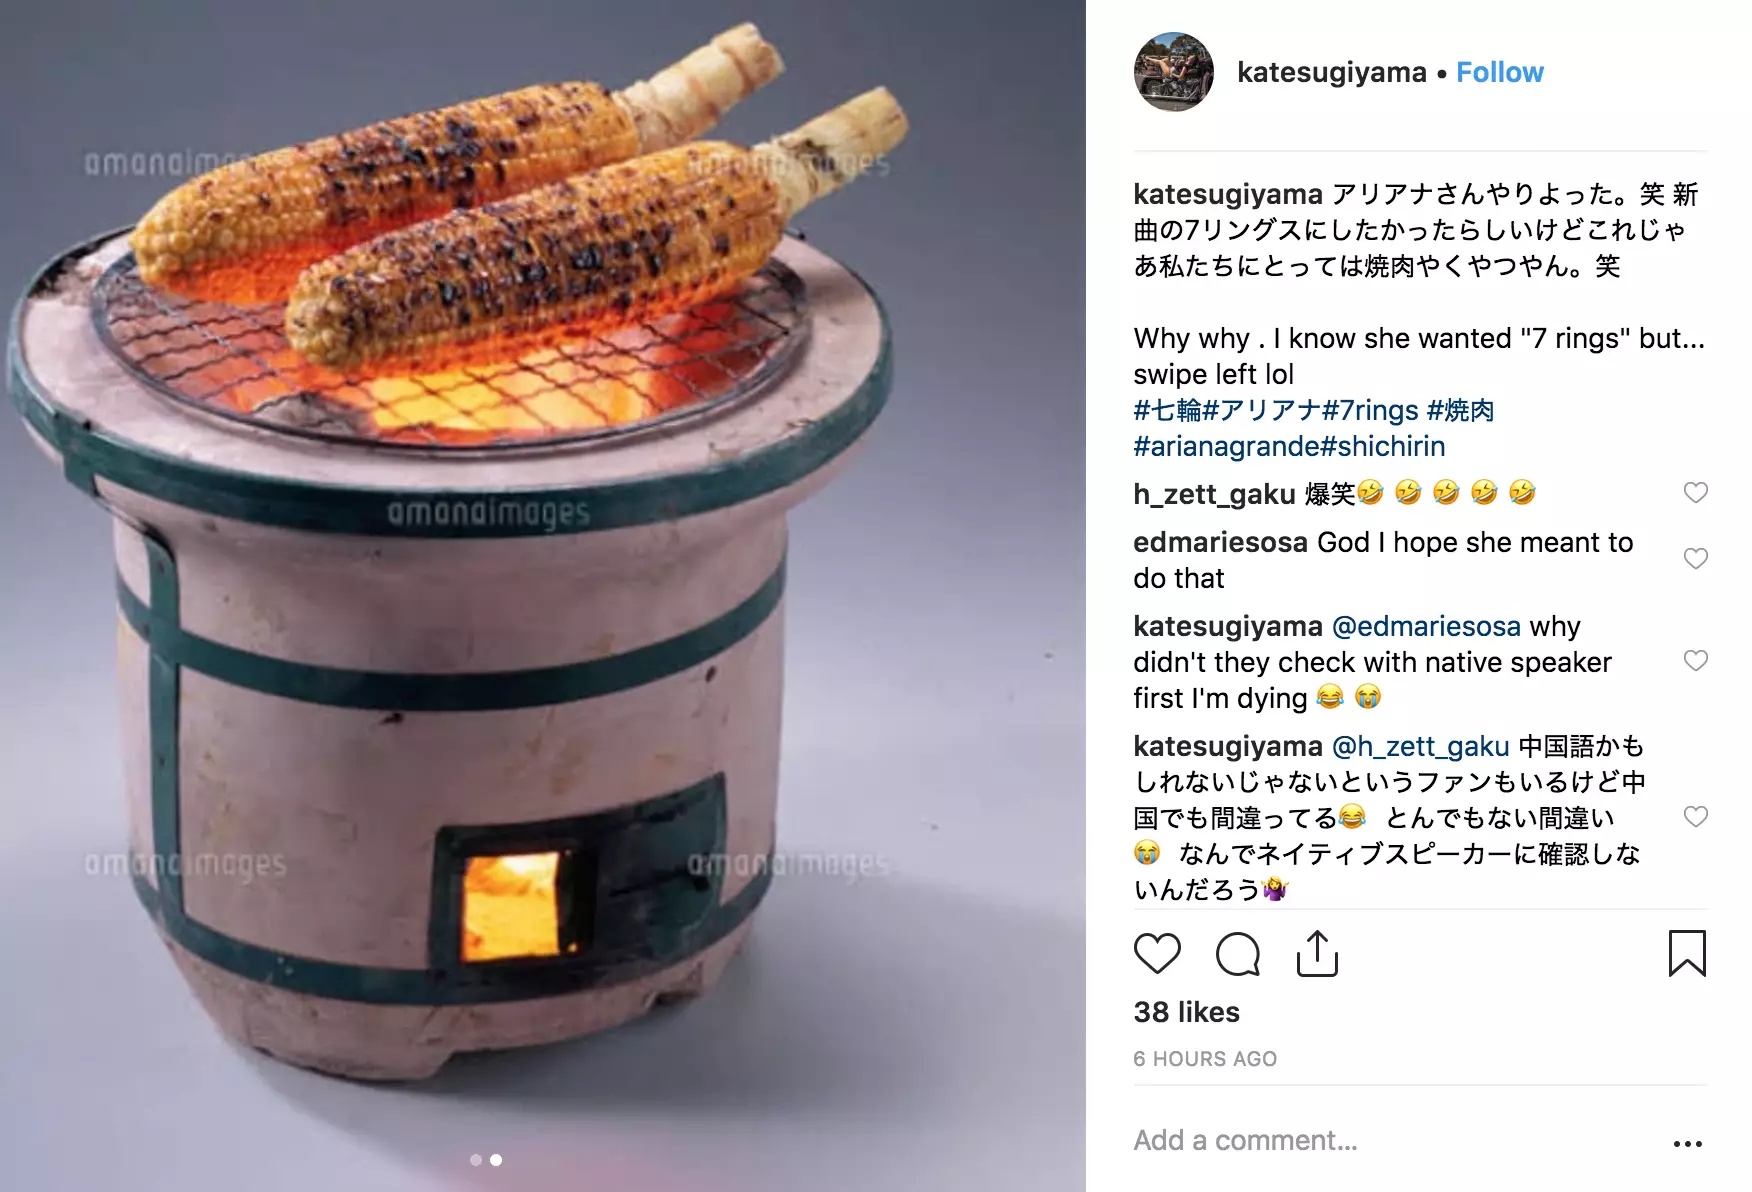 Fans attached pictures of a small barbecue grill on Instagram to explain the meaning of the words